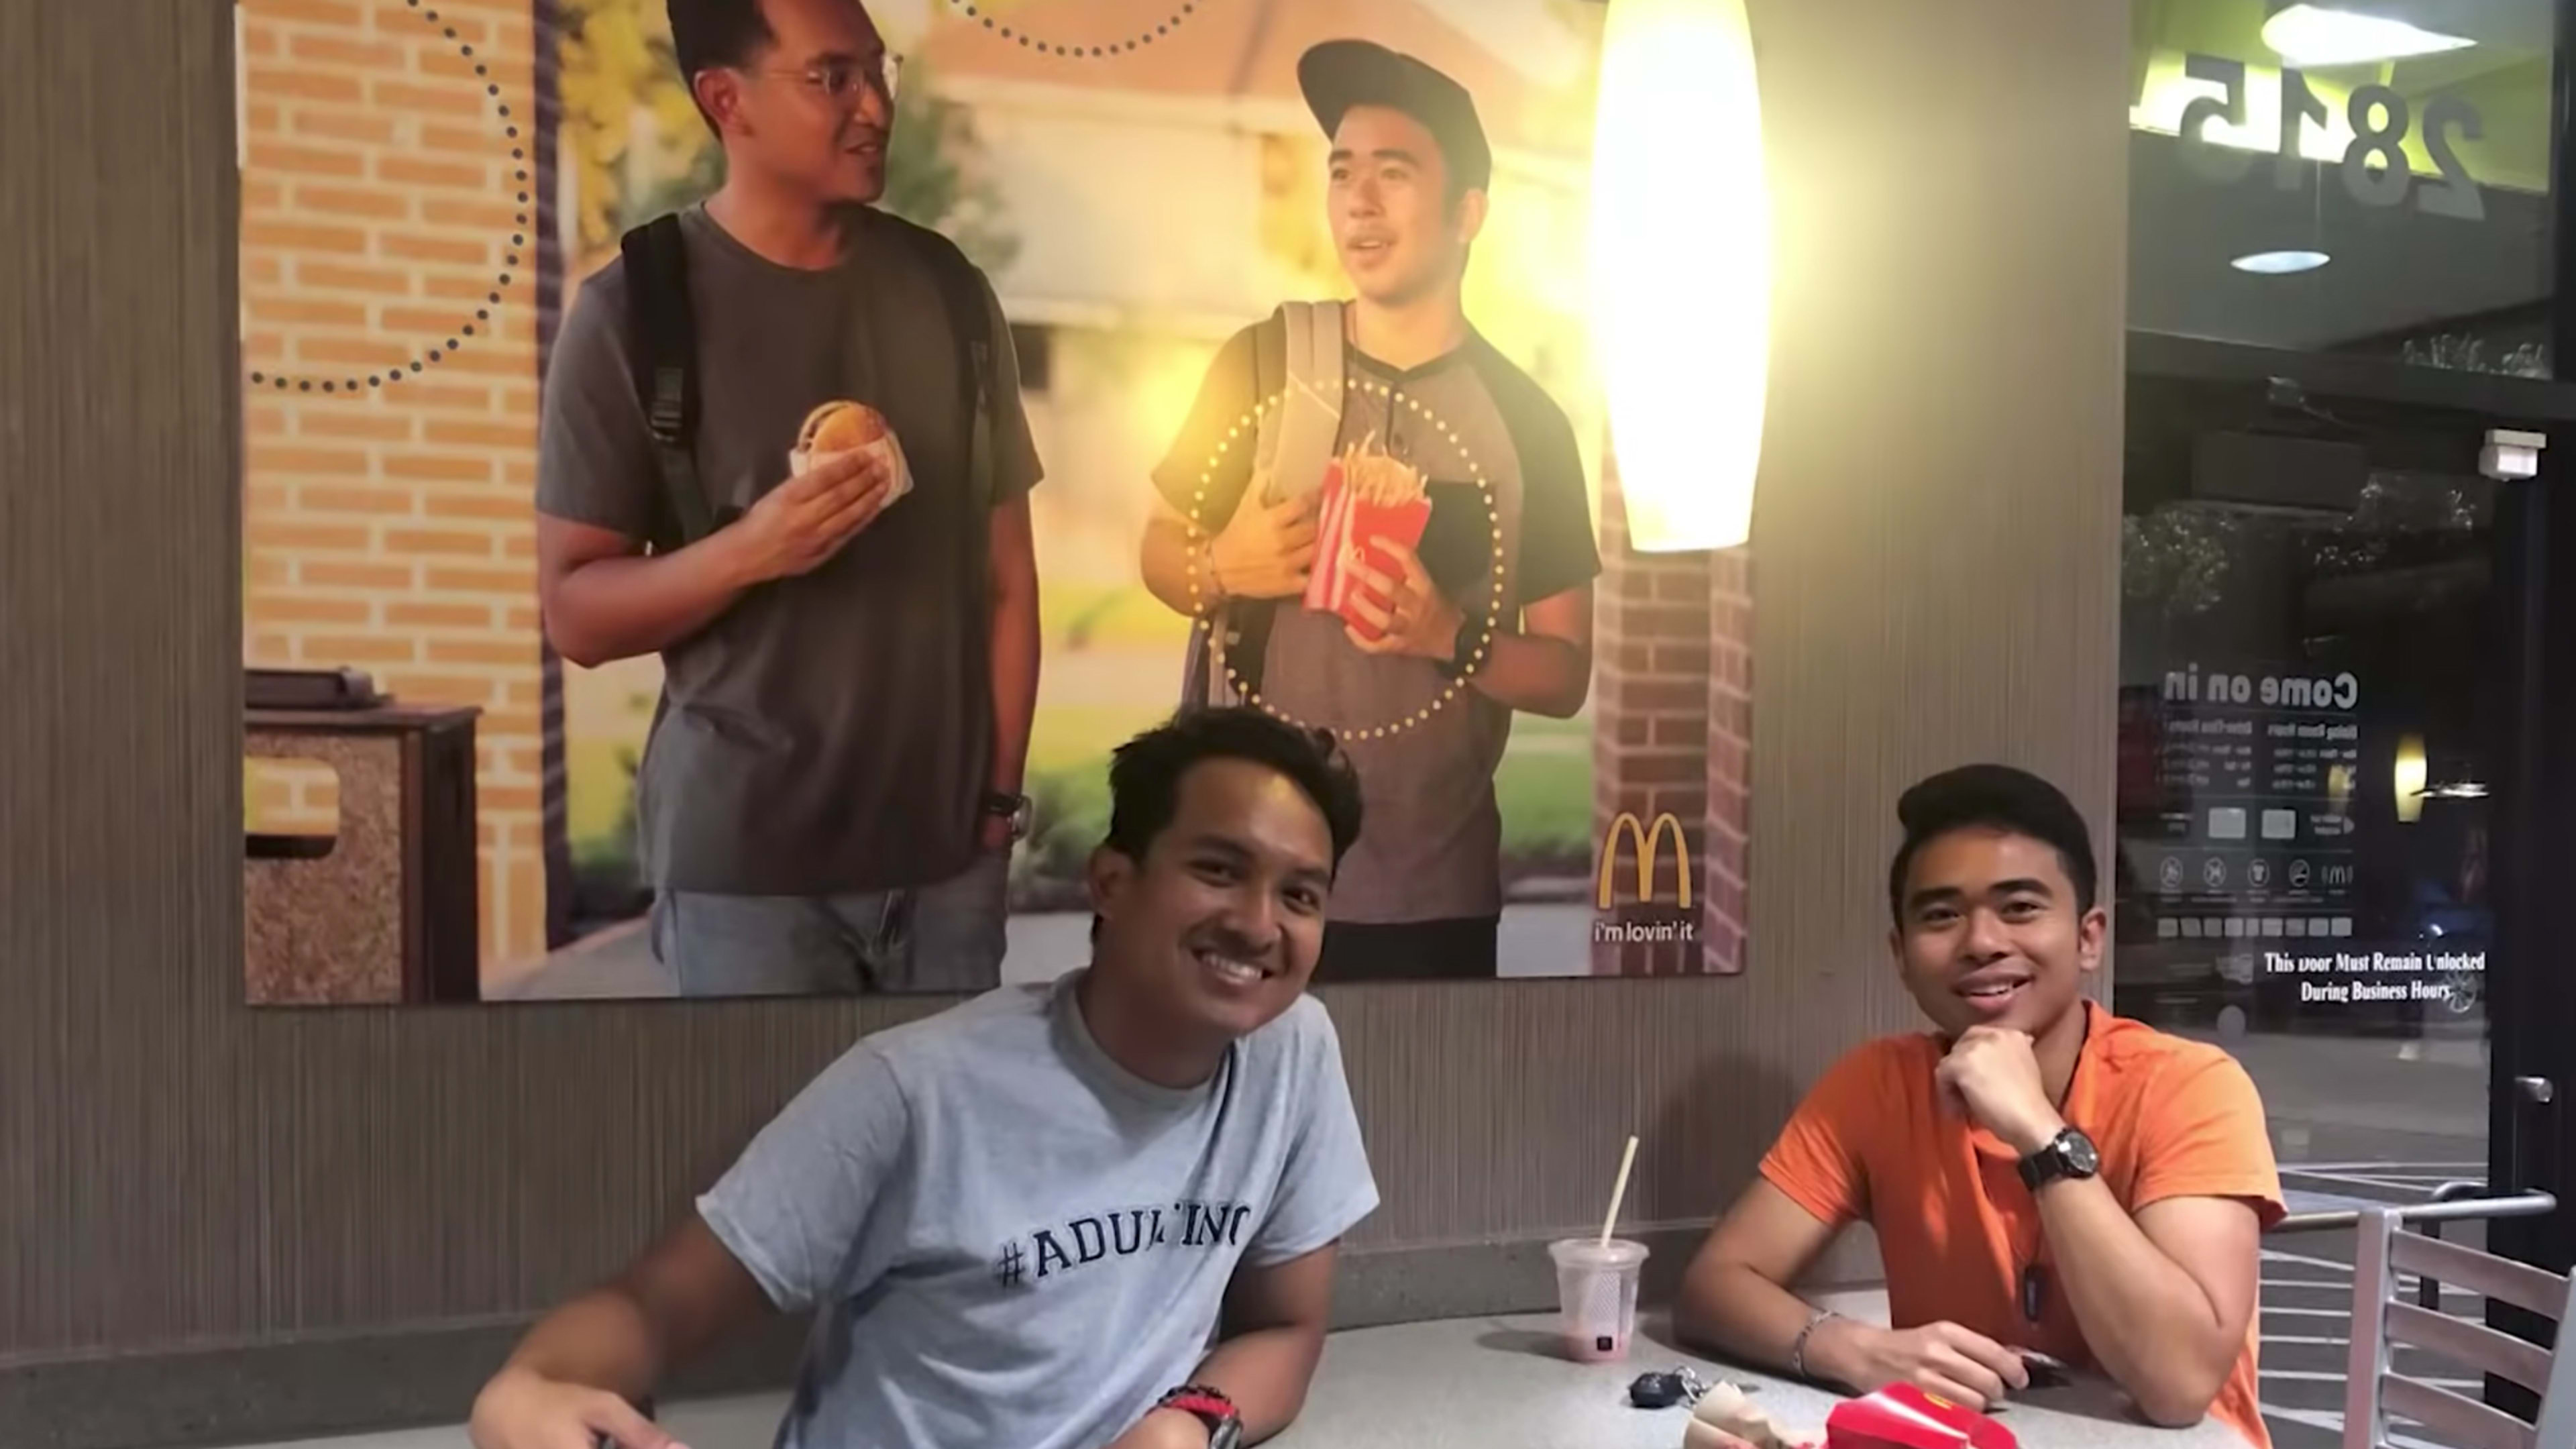 This guy put a big fake poster in McDonald’s for 51 days to make a point about diversity